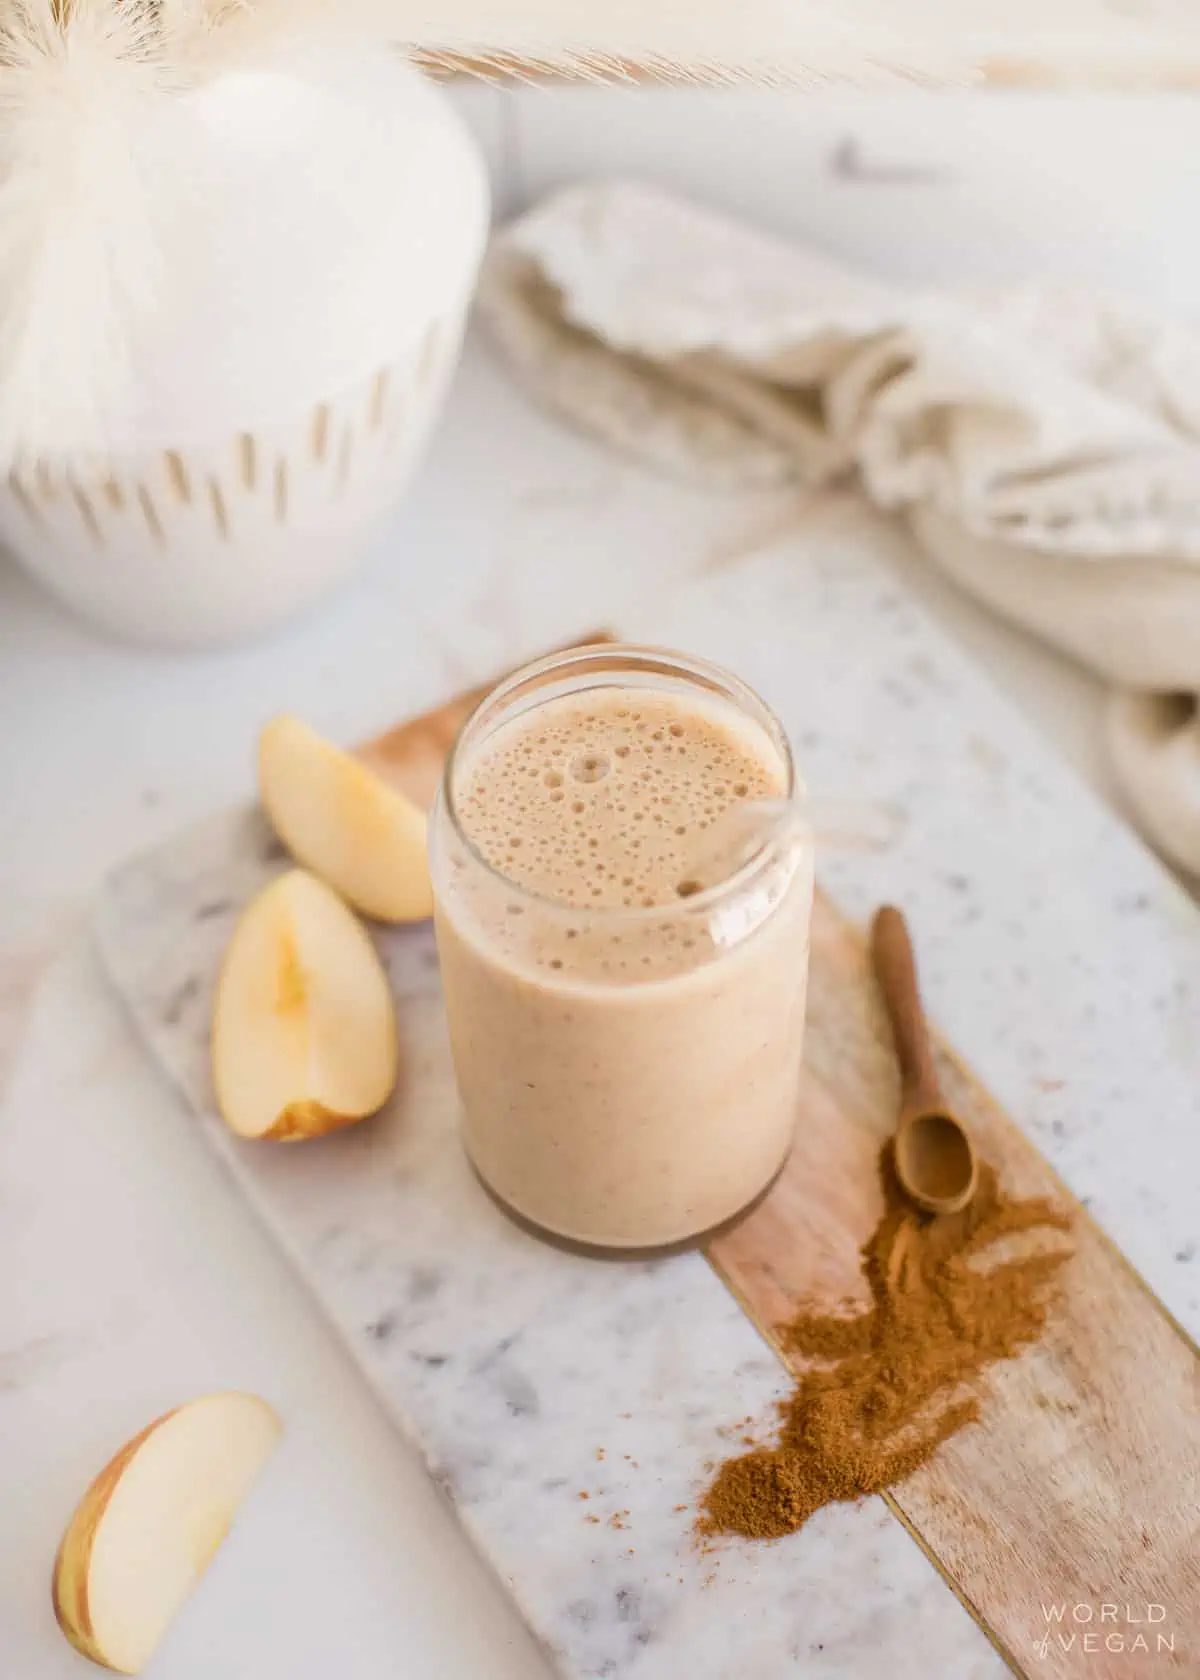 Apple banana smoothie in a glass next to sliced apples and cinnamon.